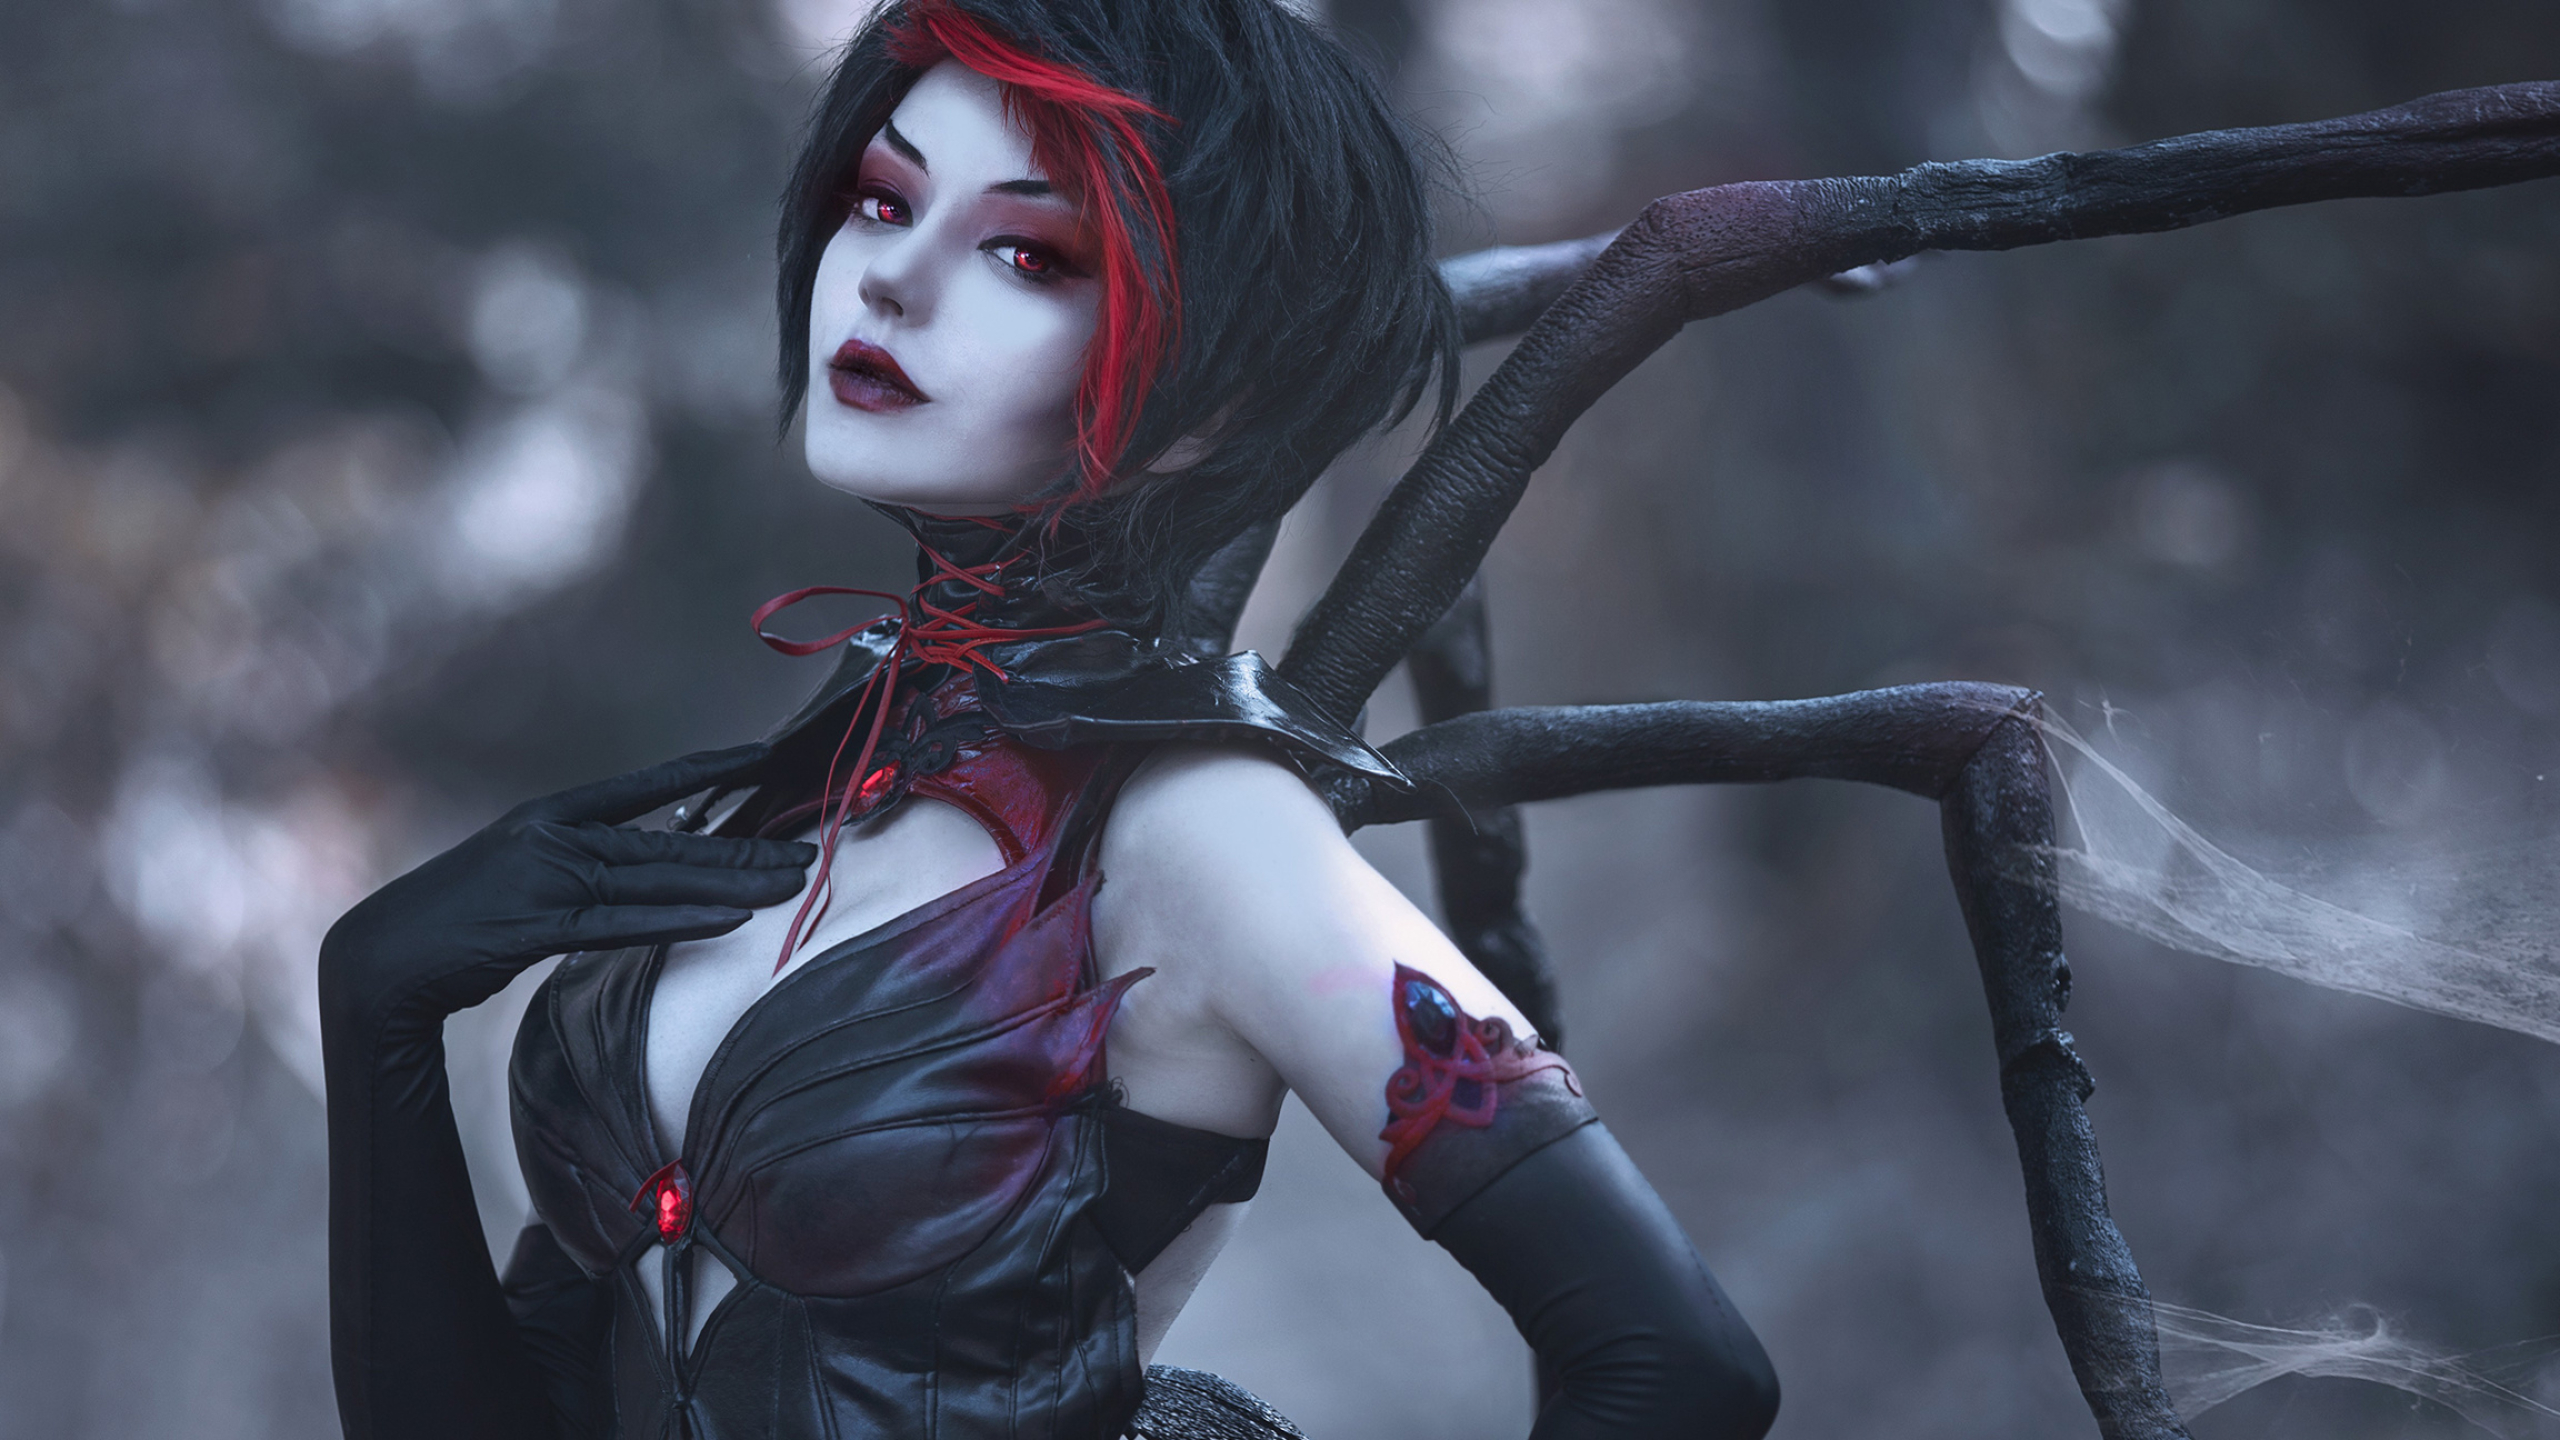 Gothic Art: Elise, the Spider Queen, League of Legends, Cosplay, Makeup, Spider web. 2560x1440 HD Wallpaper.